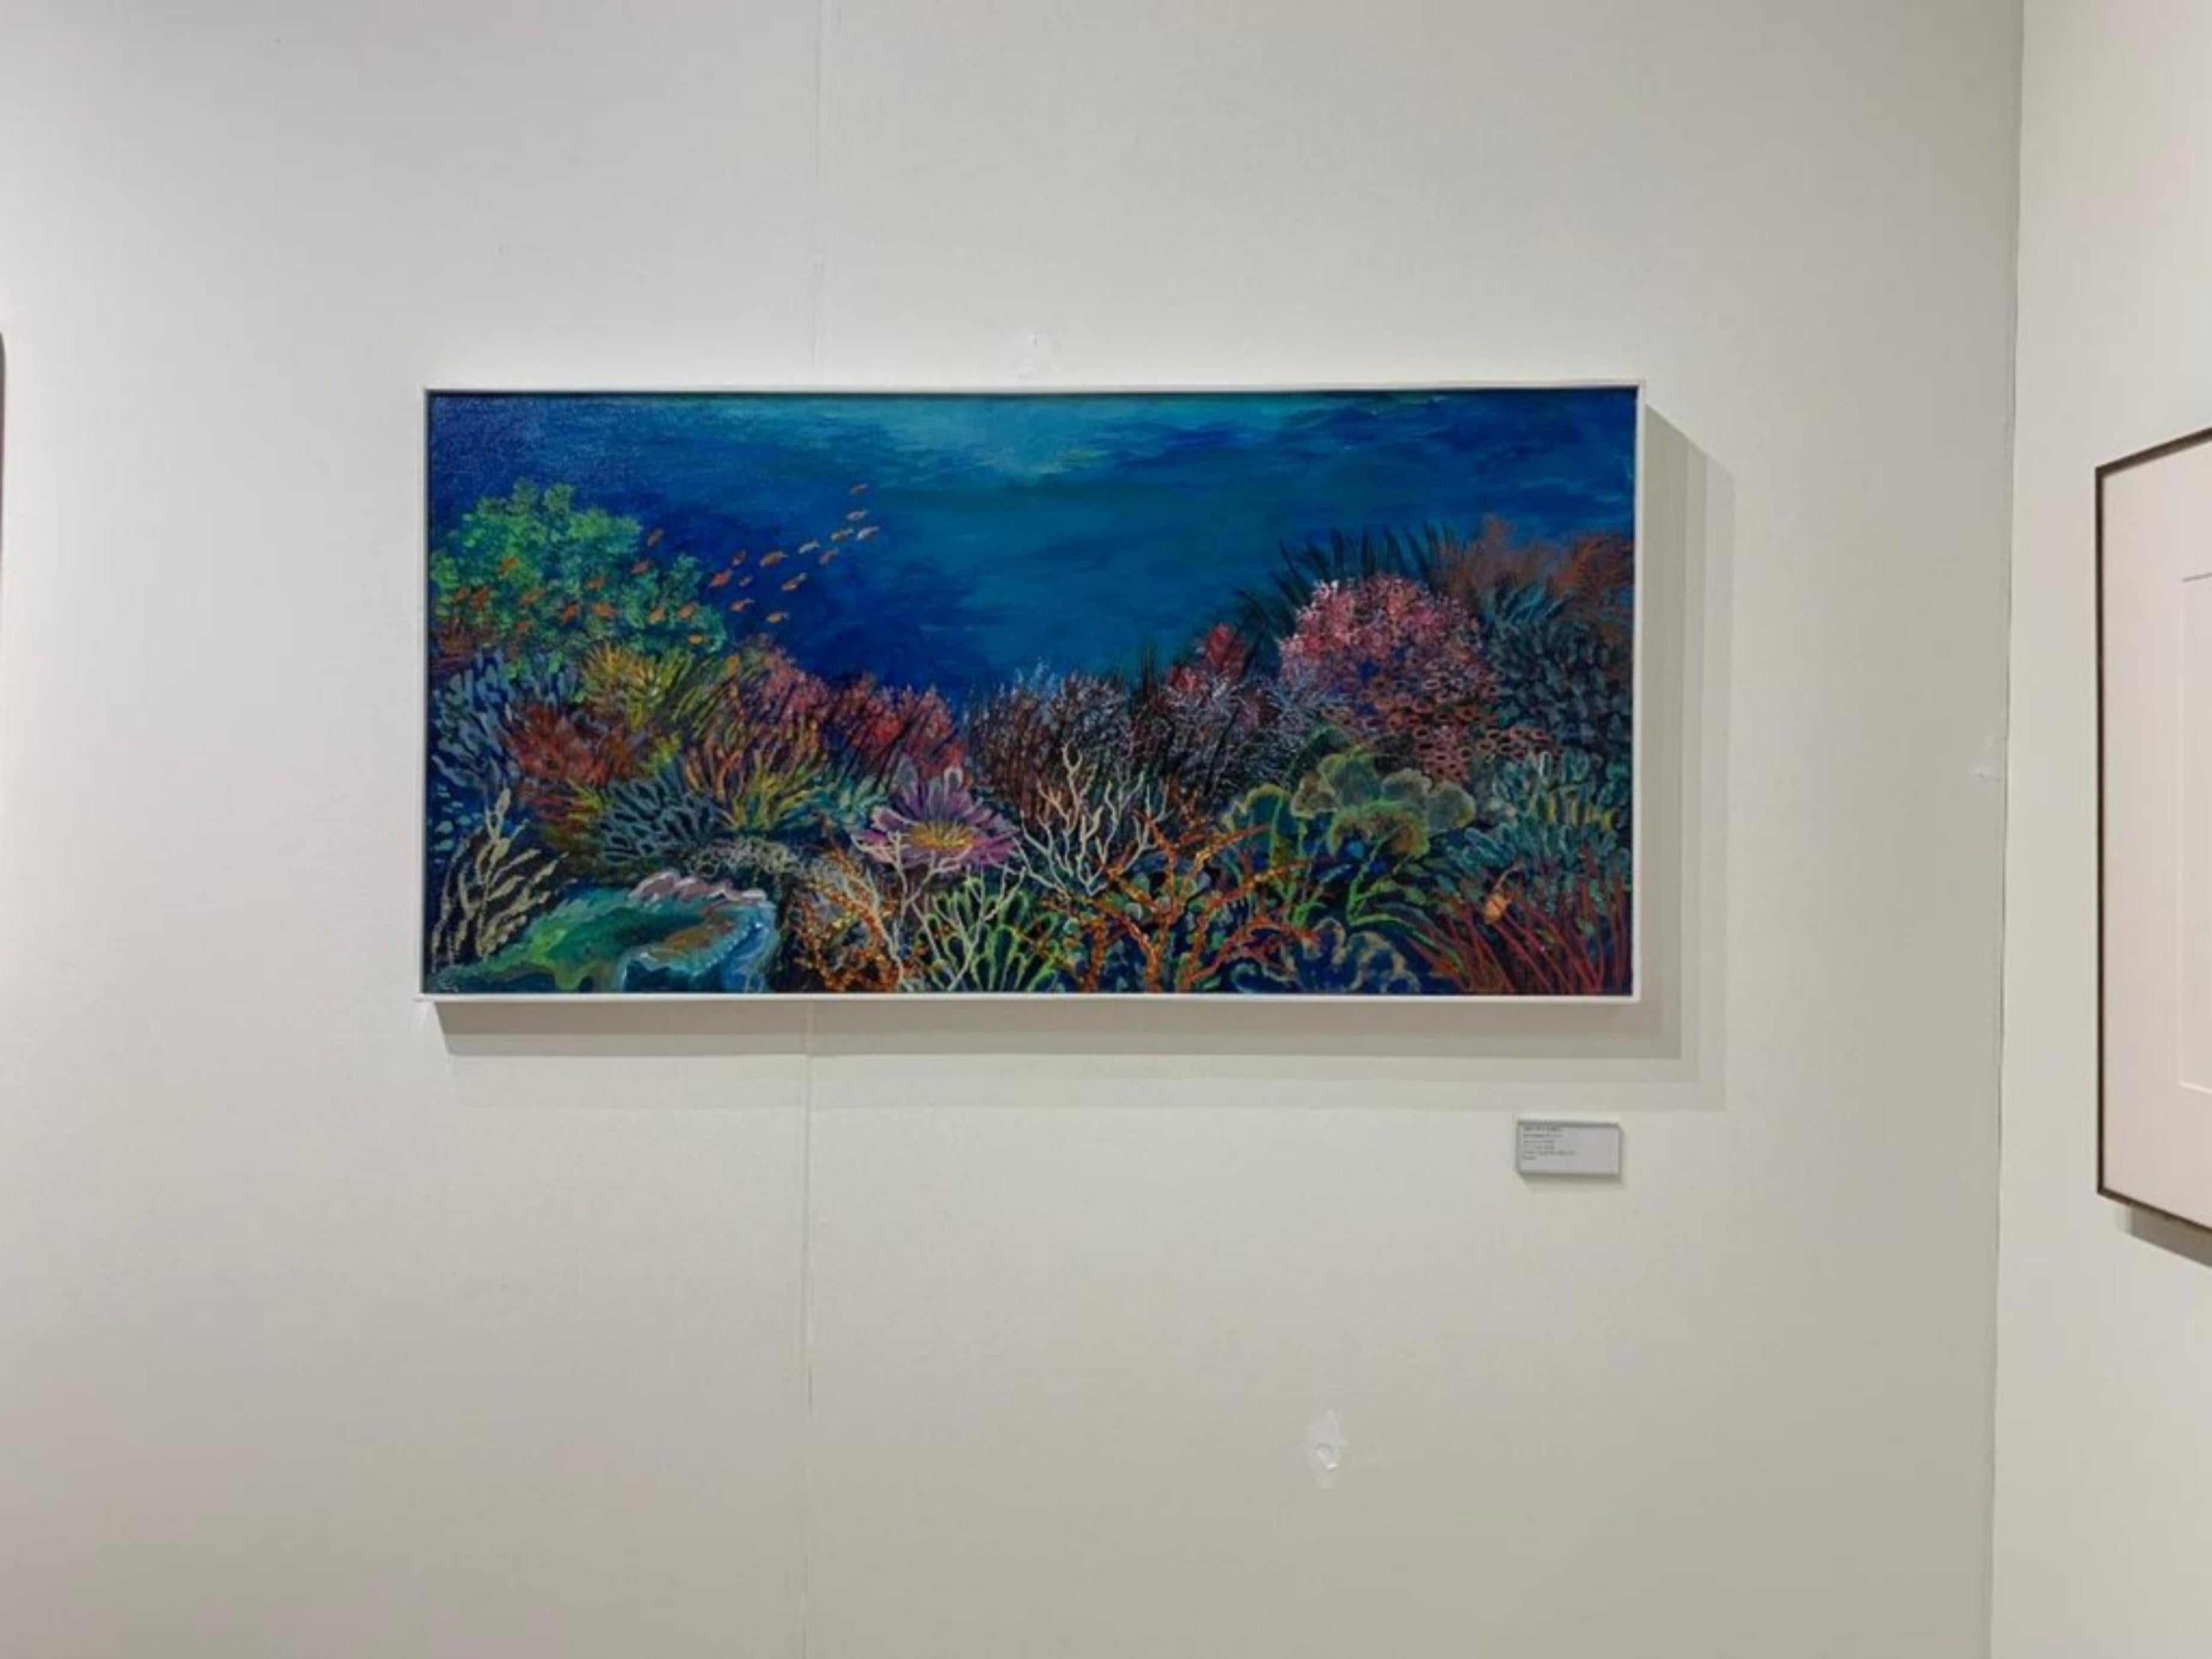 Sea Garden IV - Painting by Thelma Appel